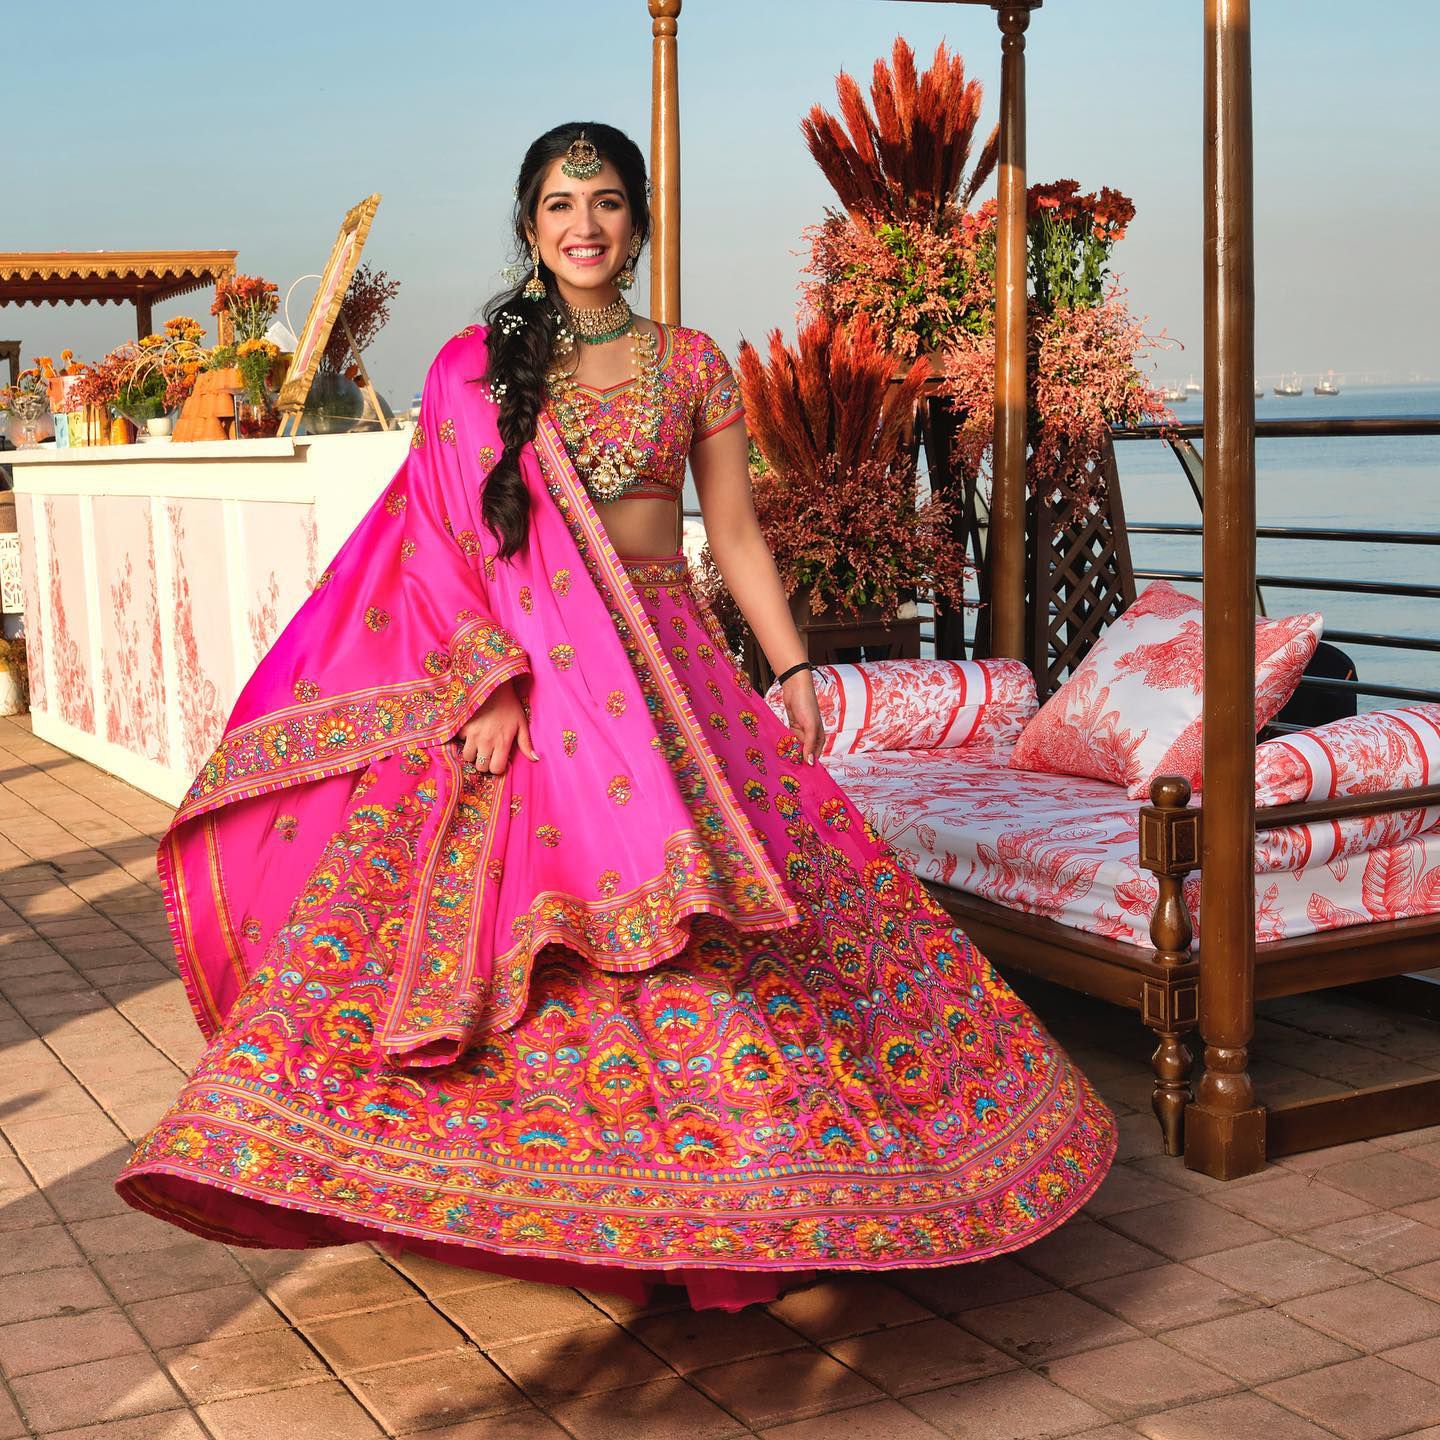 ahead of ambani nuptials, here are five of the most expensive indian weddings of all time